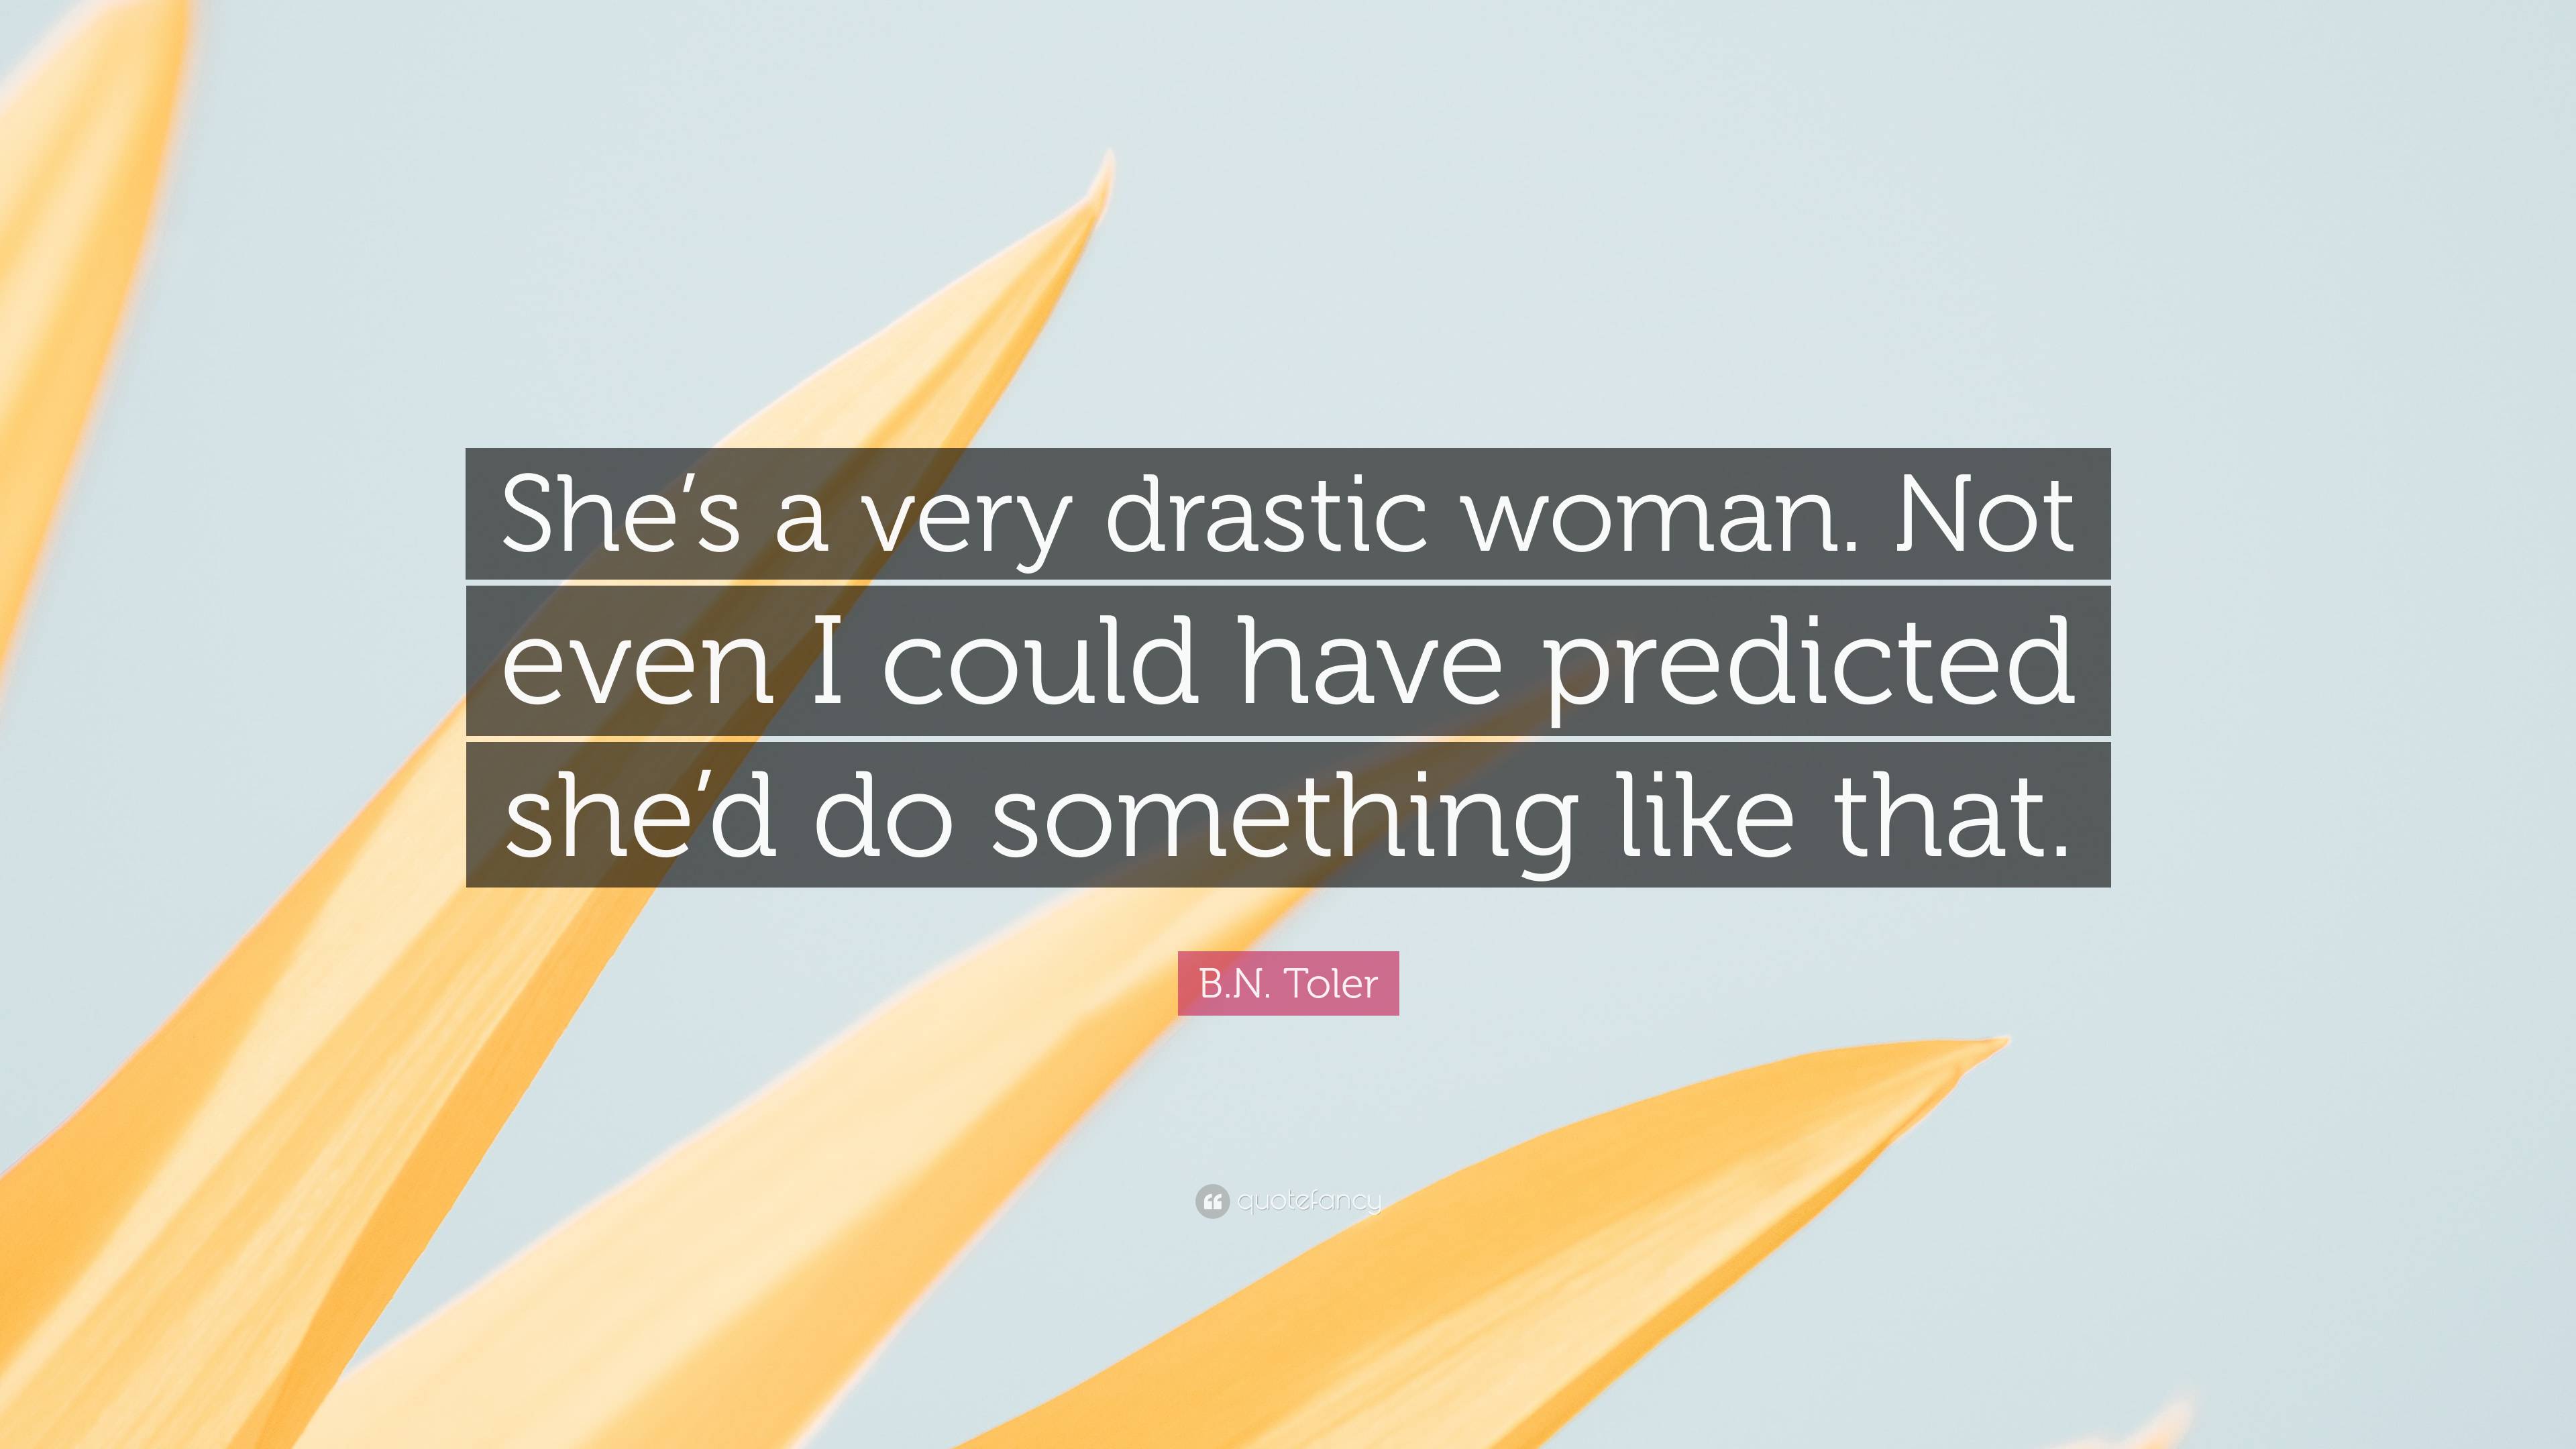 B.N. Toler Quote: “She’s a very drastic woman. Not even I could have ...